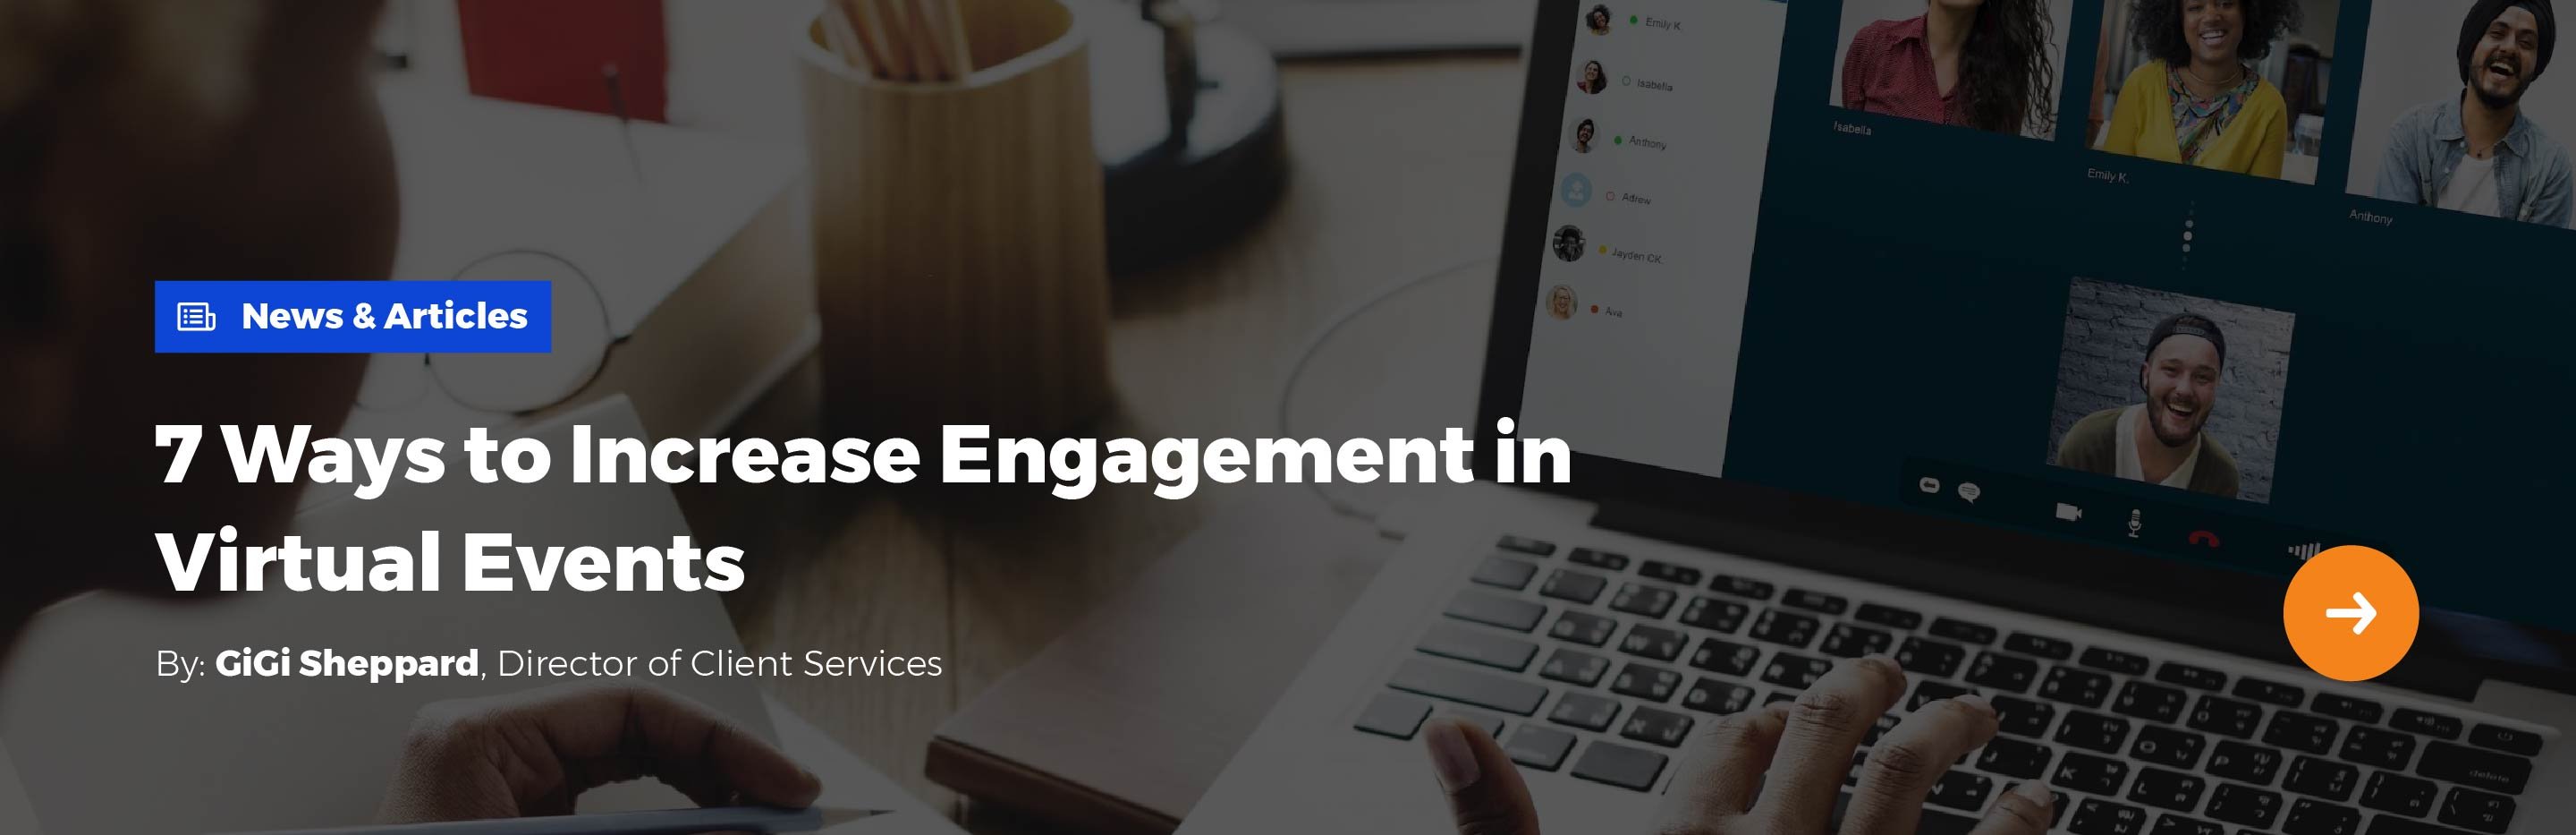 News & Articles: 7 Ways to Increase Engagement in Virtual Events